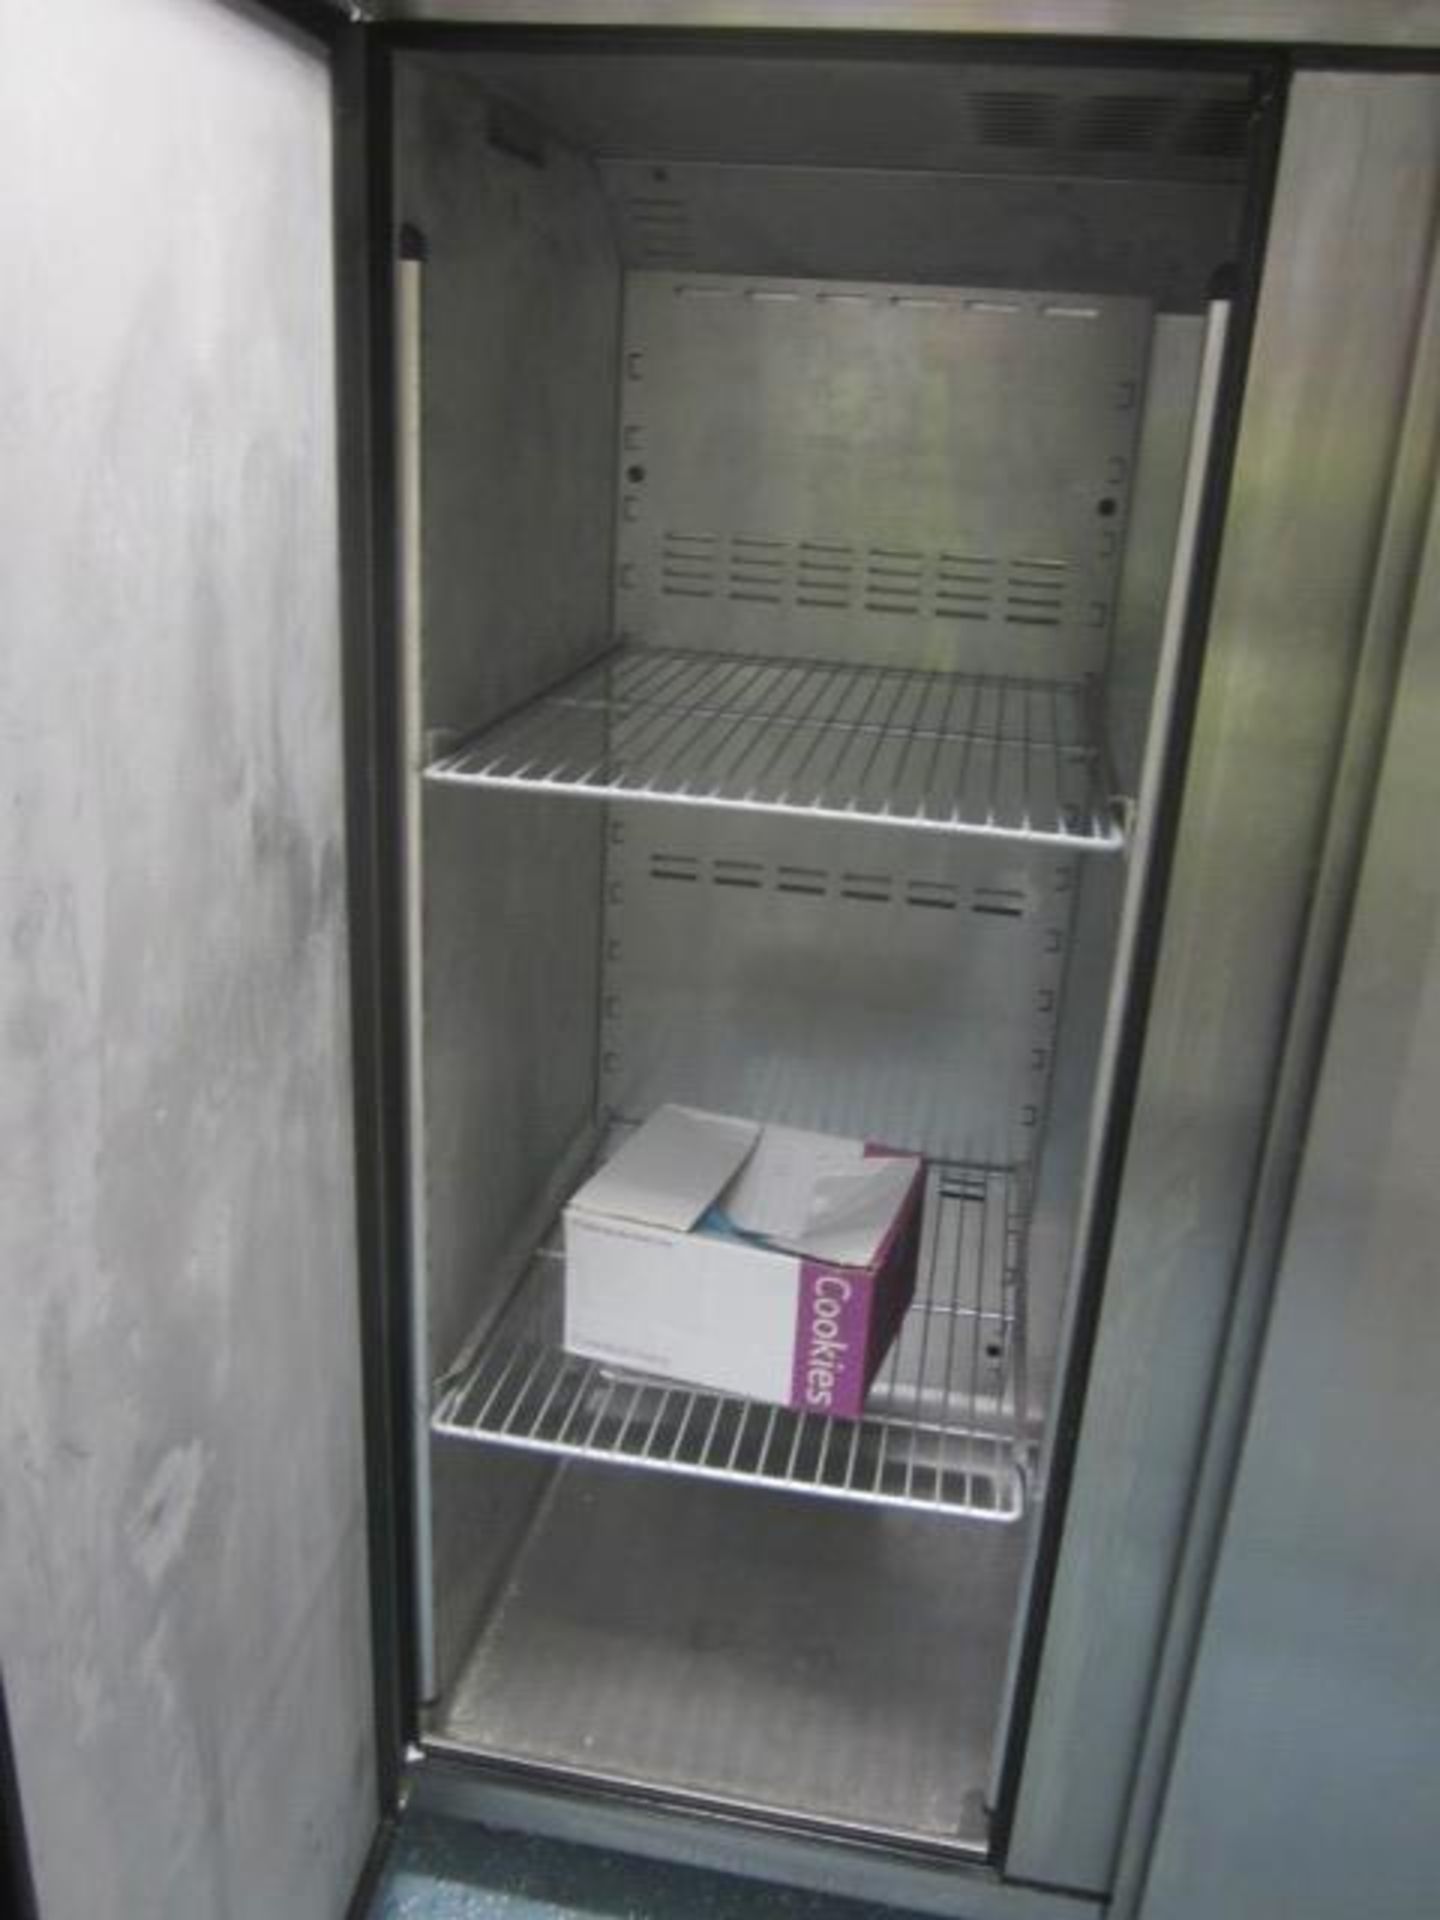 Foster Eco Pro 2 door stainless steel commercial freezer, model EP14406, serial no. E5463536, - Image 3 of 4